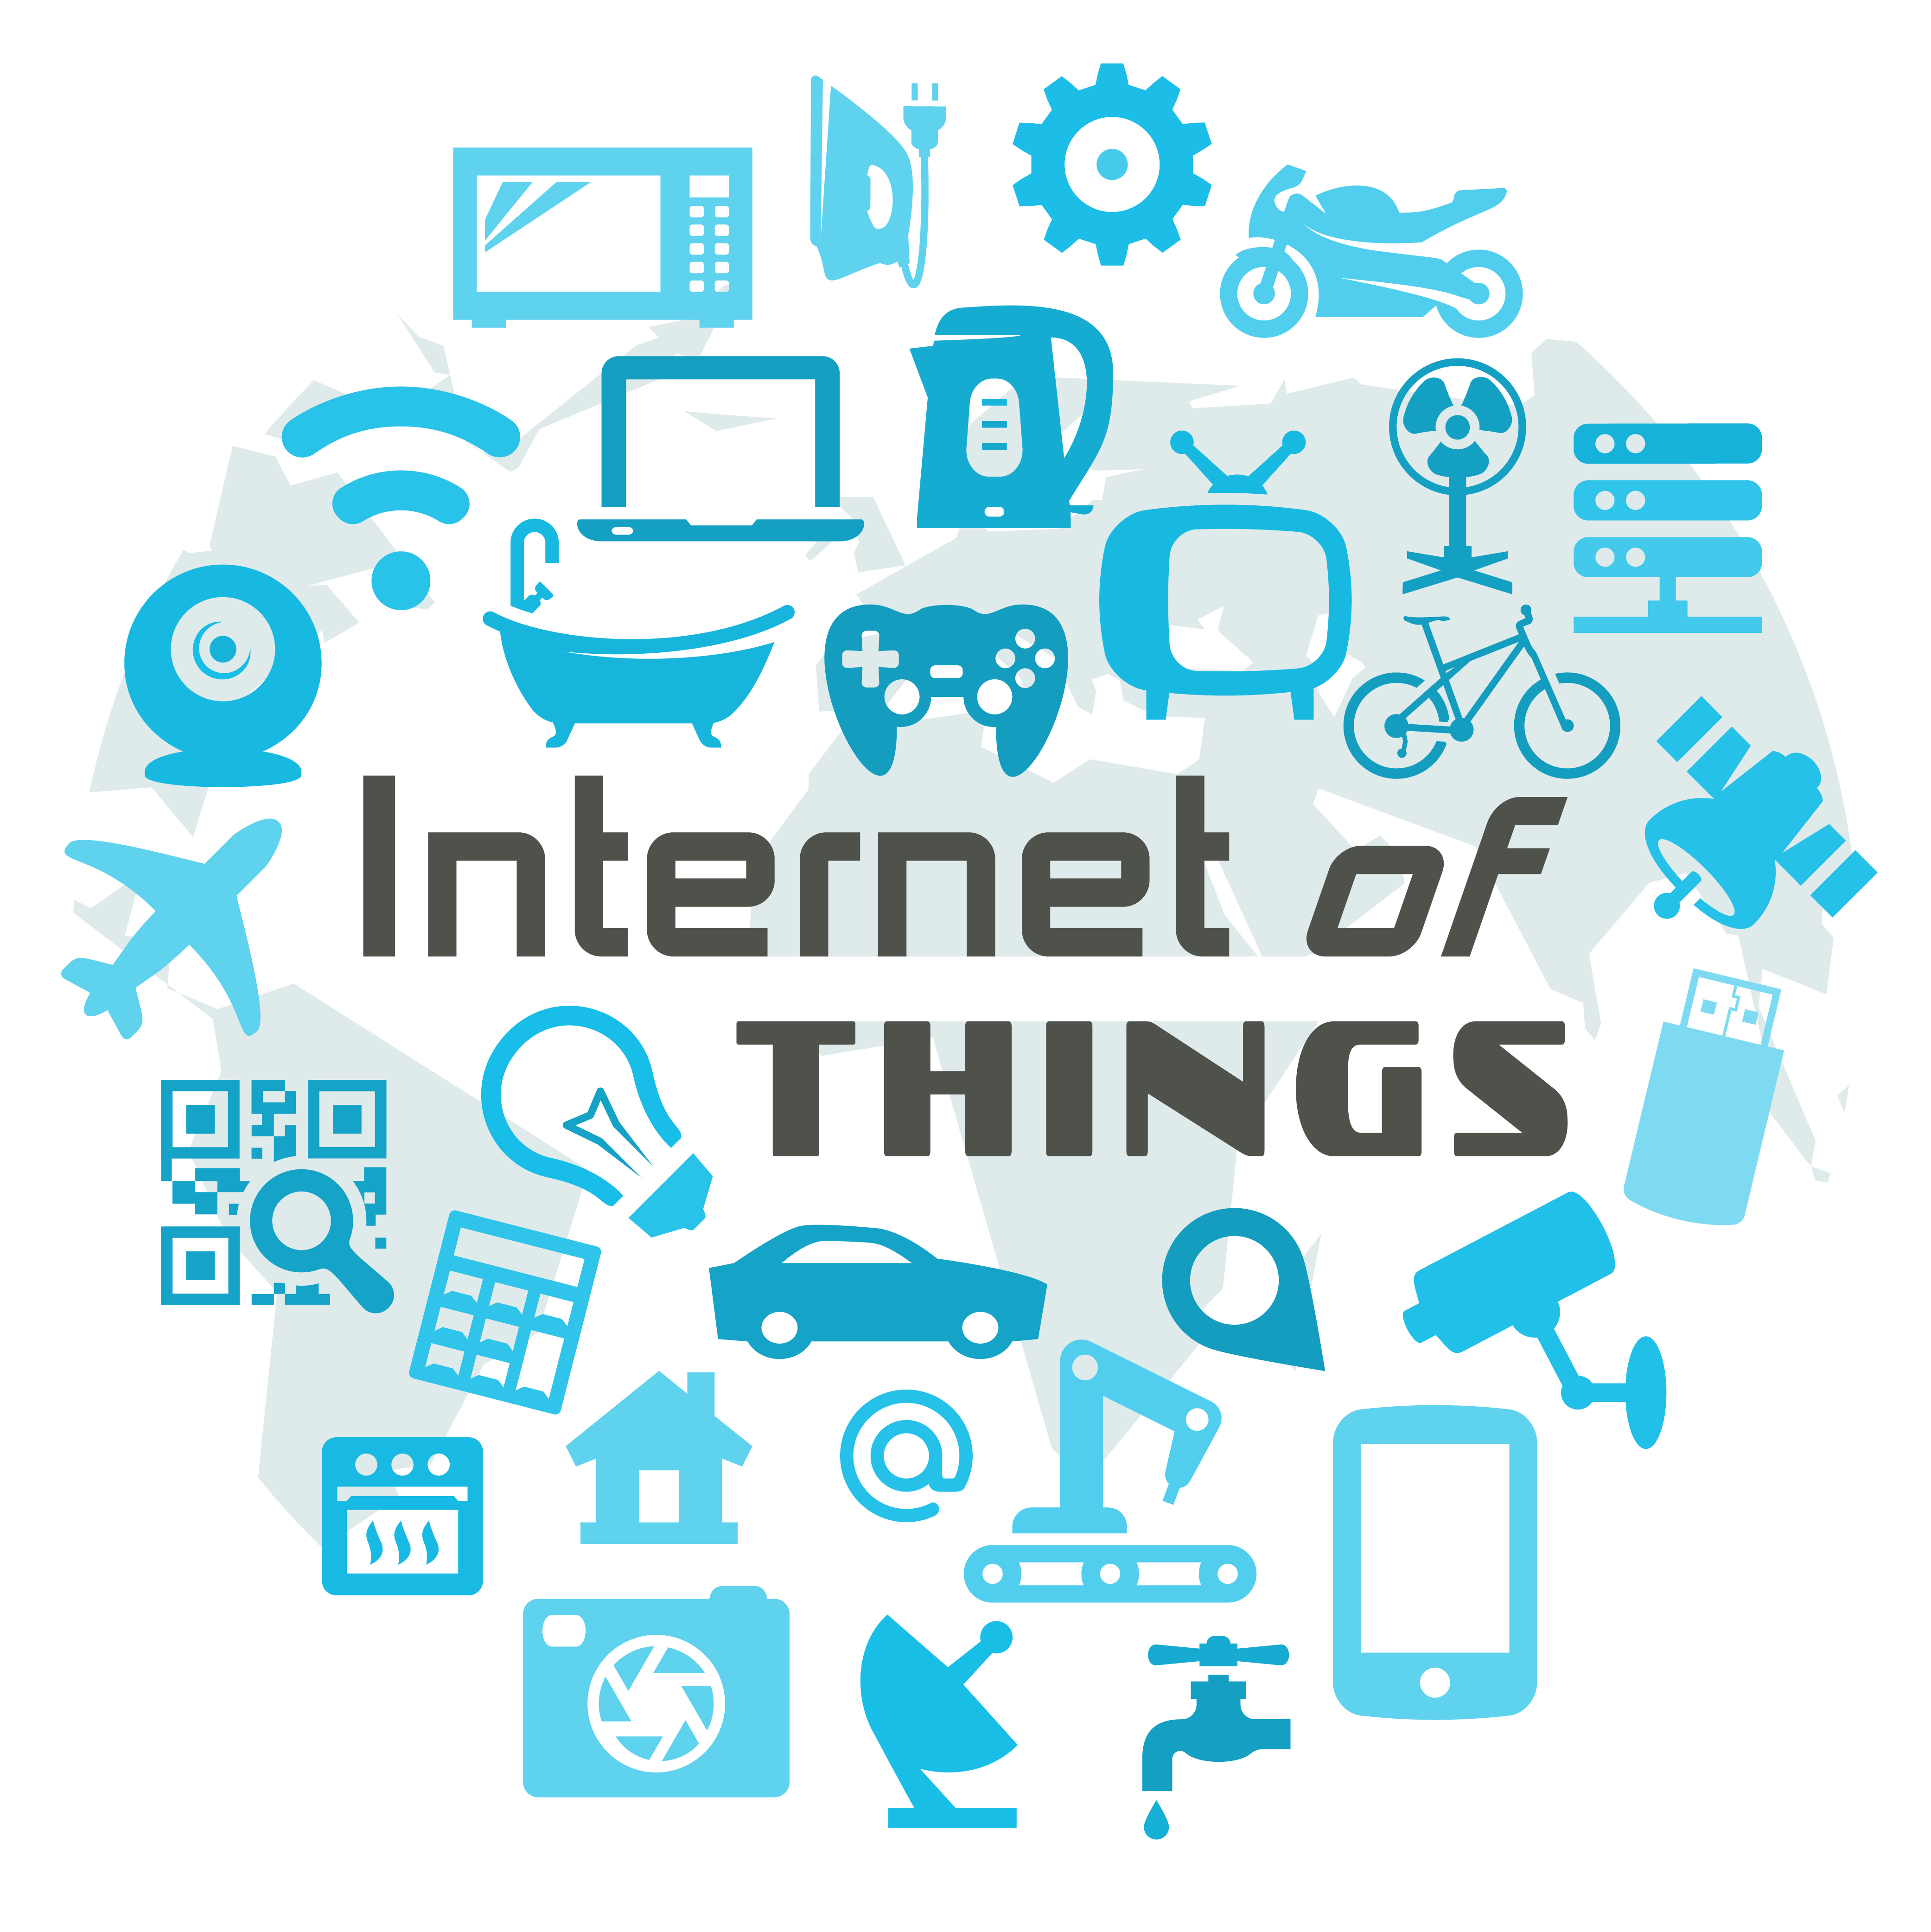 The IoT market continues to experience unprecedented growth with an estimated 26 billion devices to be linked to software by the year 2020.